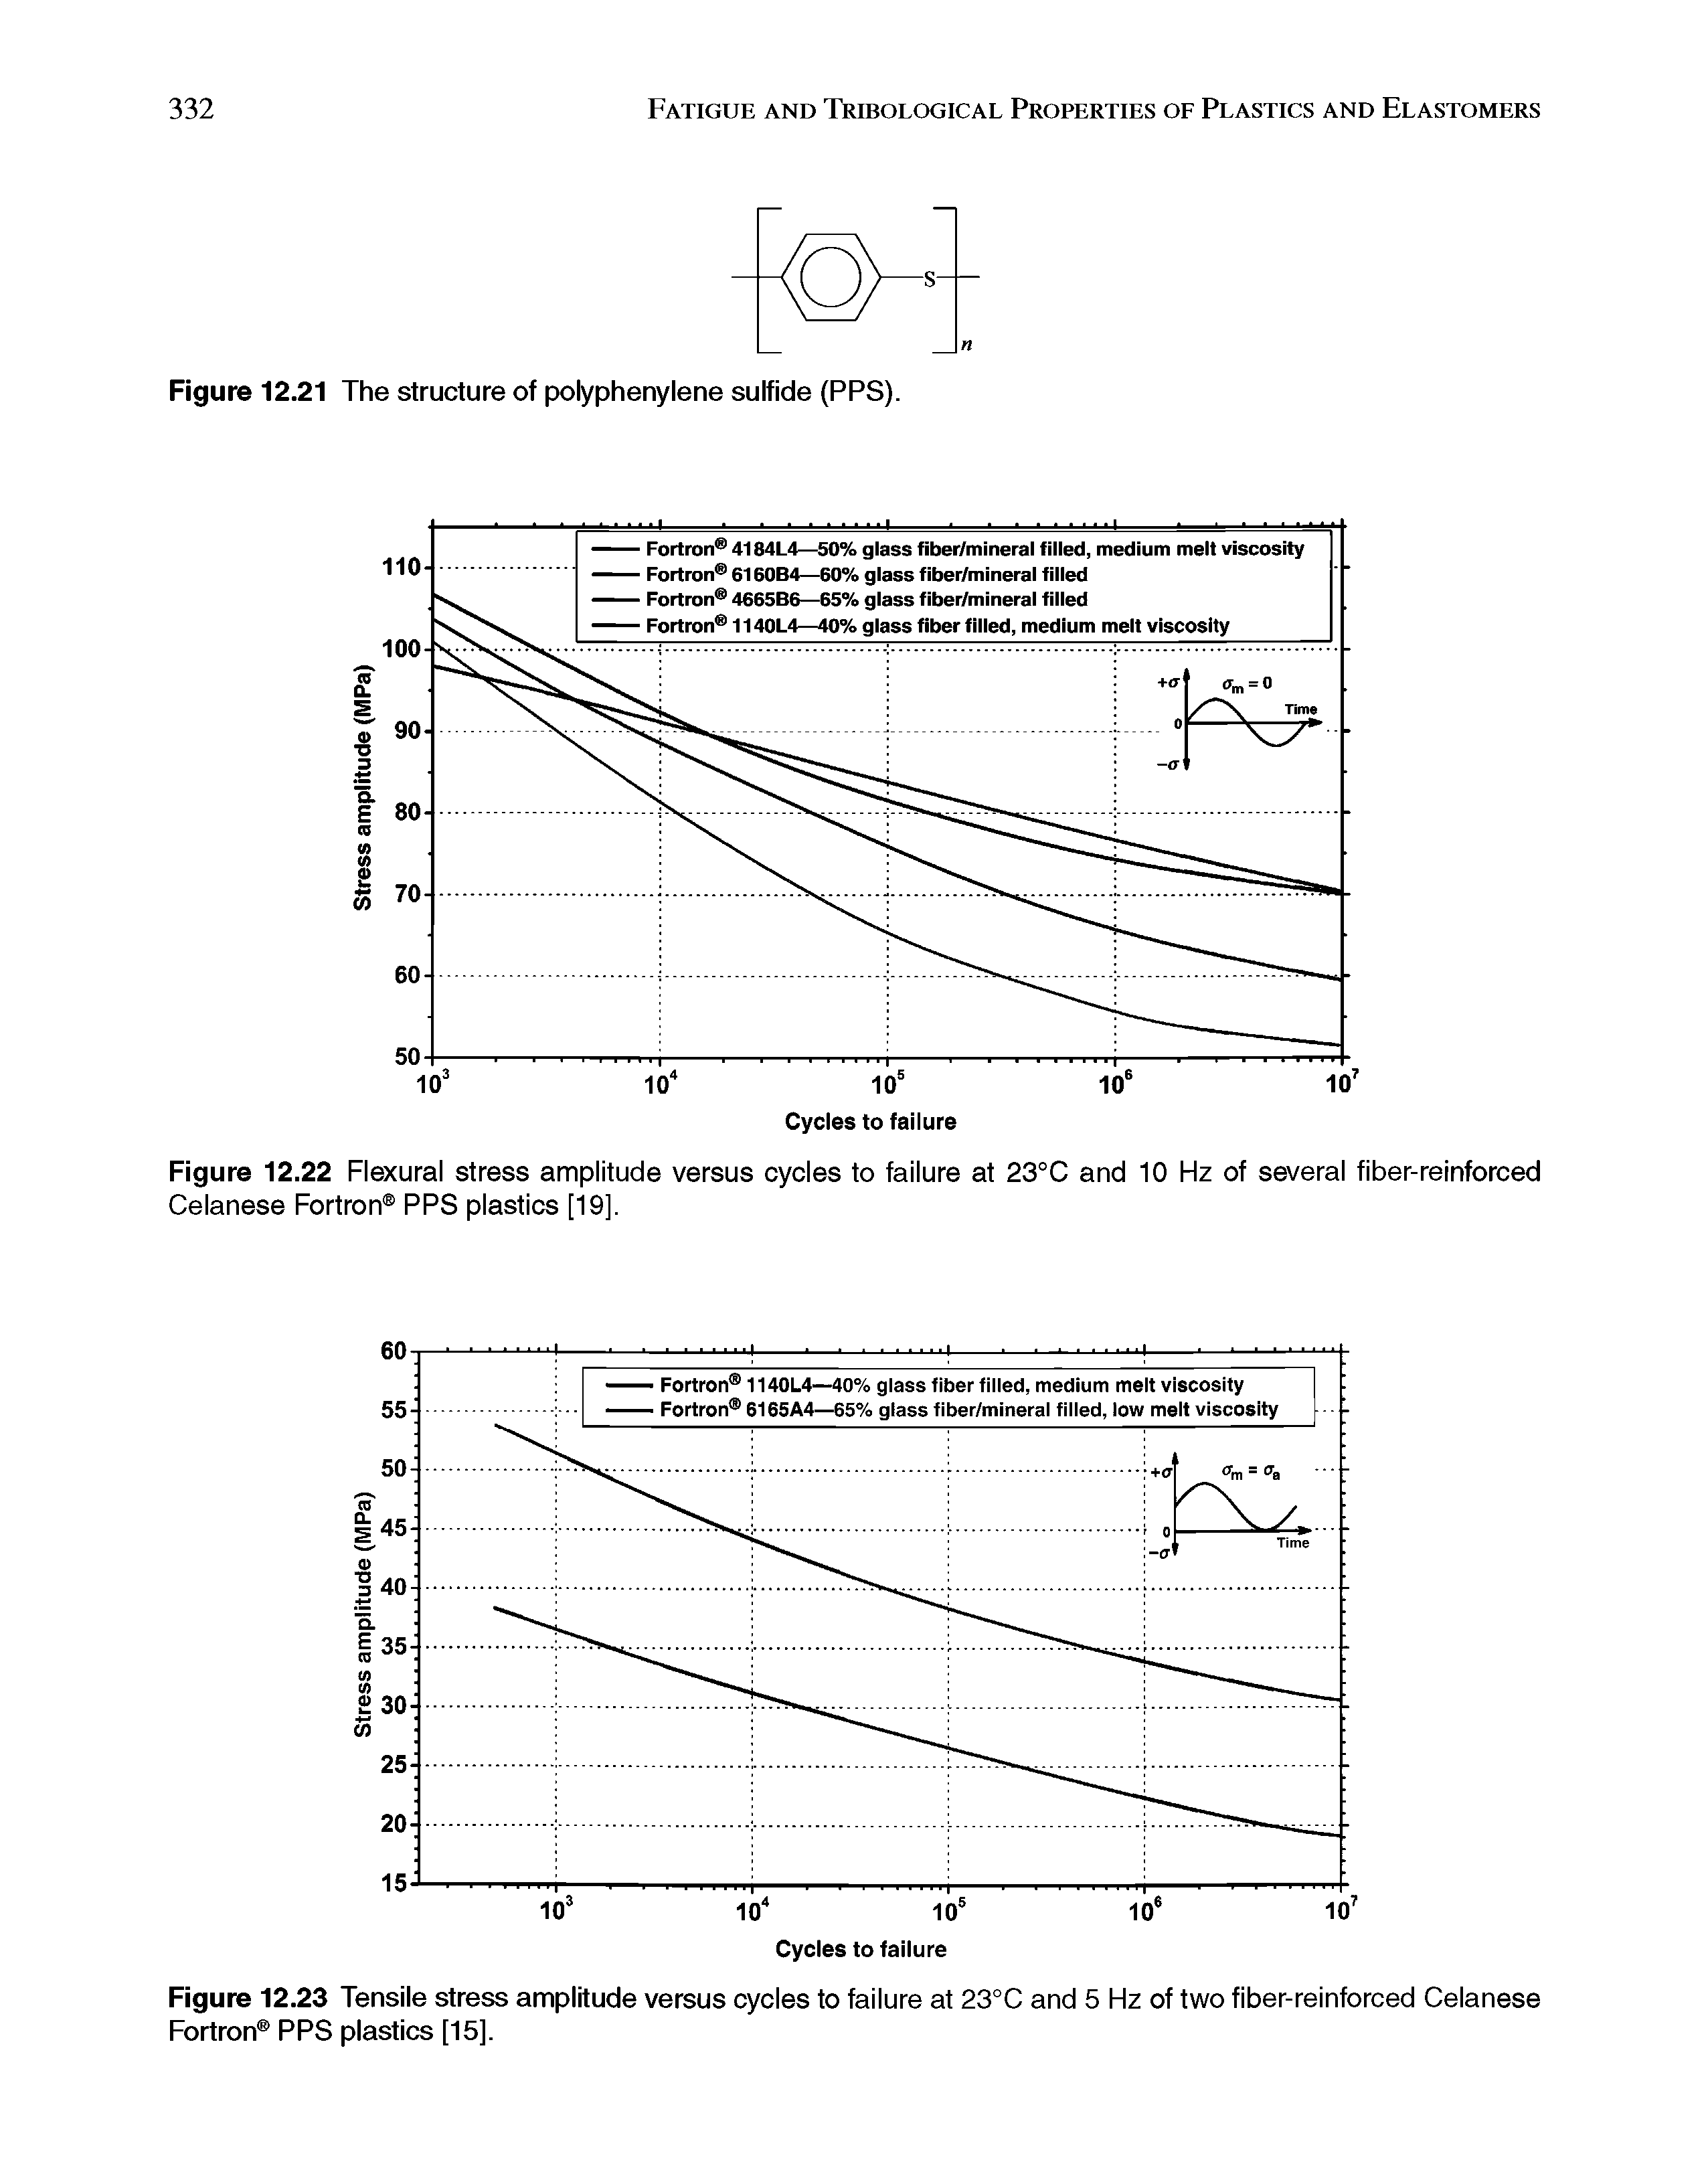 Figure 12.22 Flexural stress amplitude versus cycles to failure at 23°C and 10 Hz of several fiber-reinforced Celanese Fortron PPS plastics [19],...